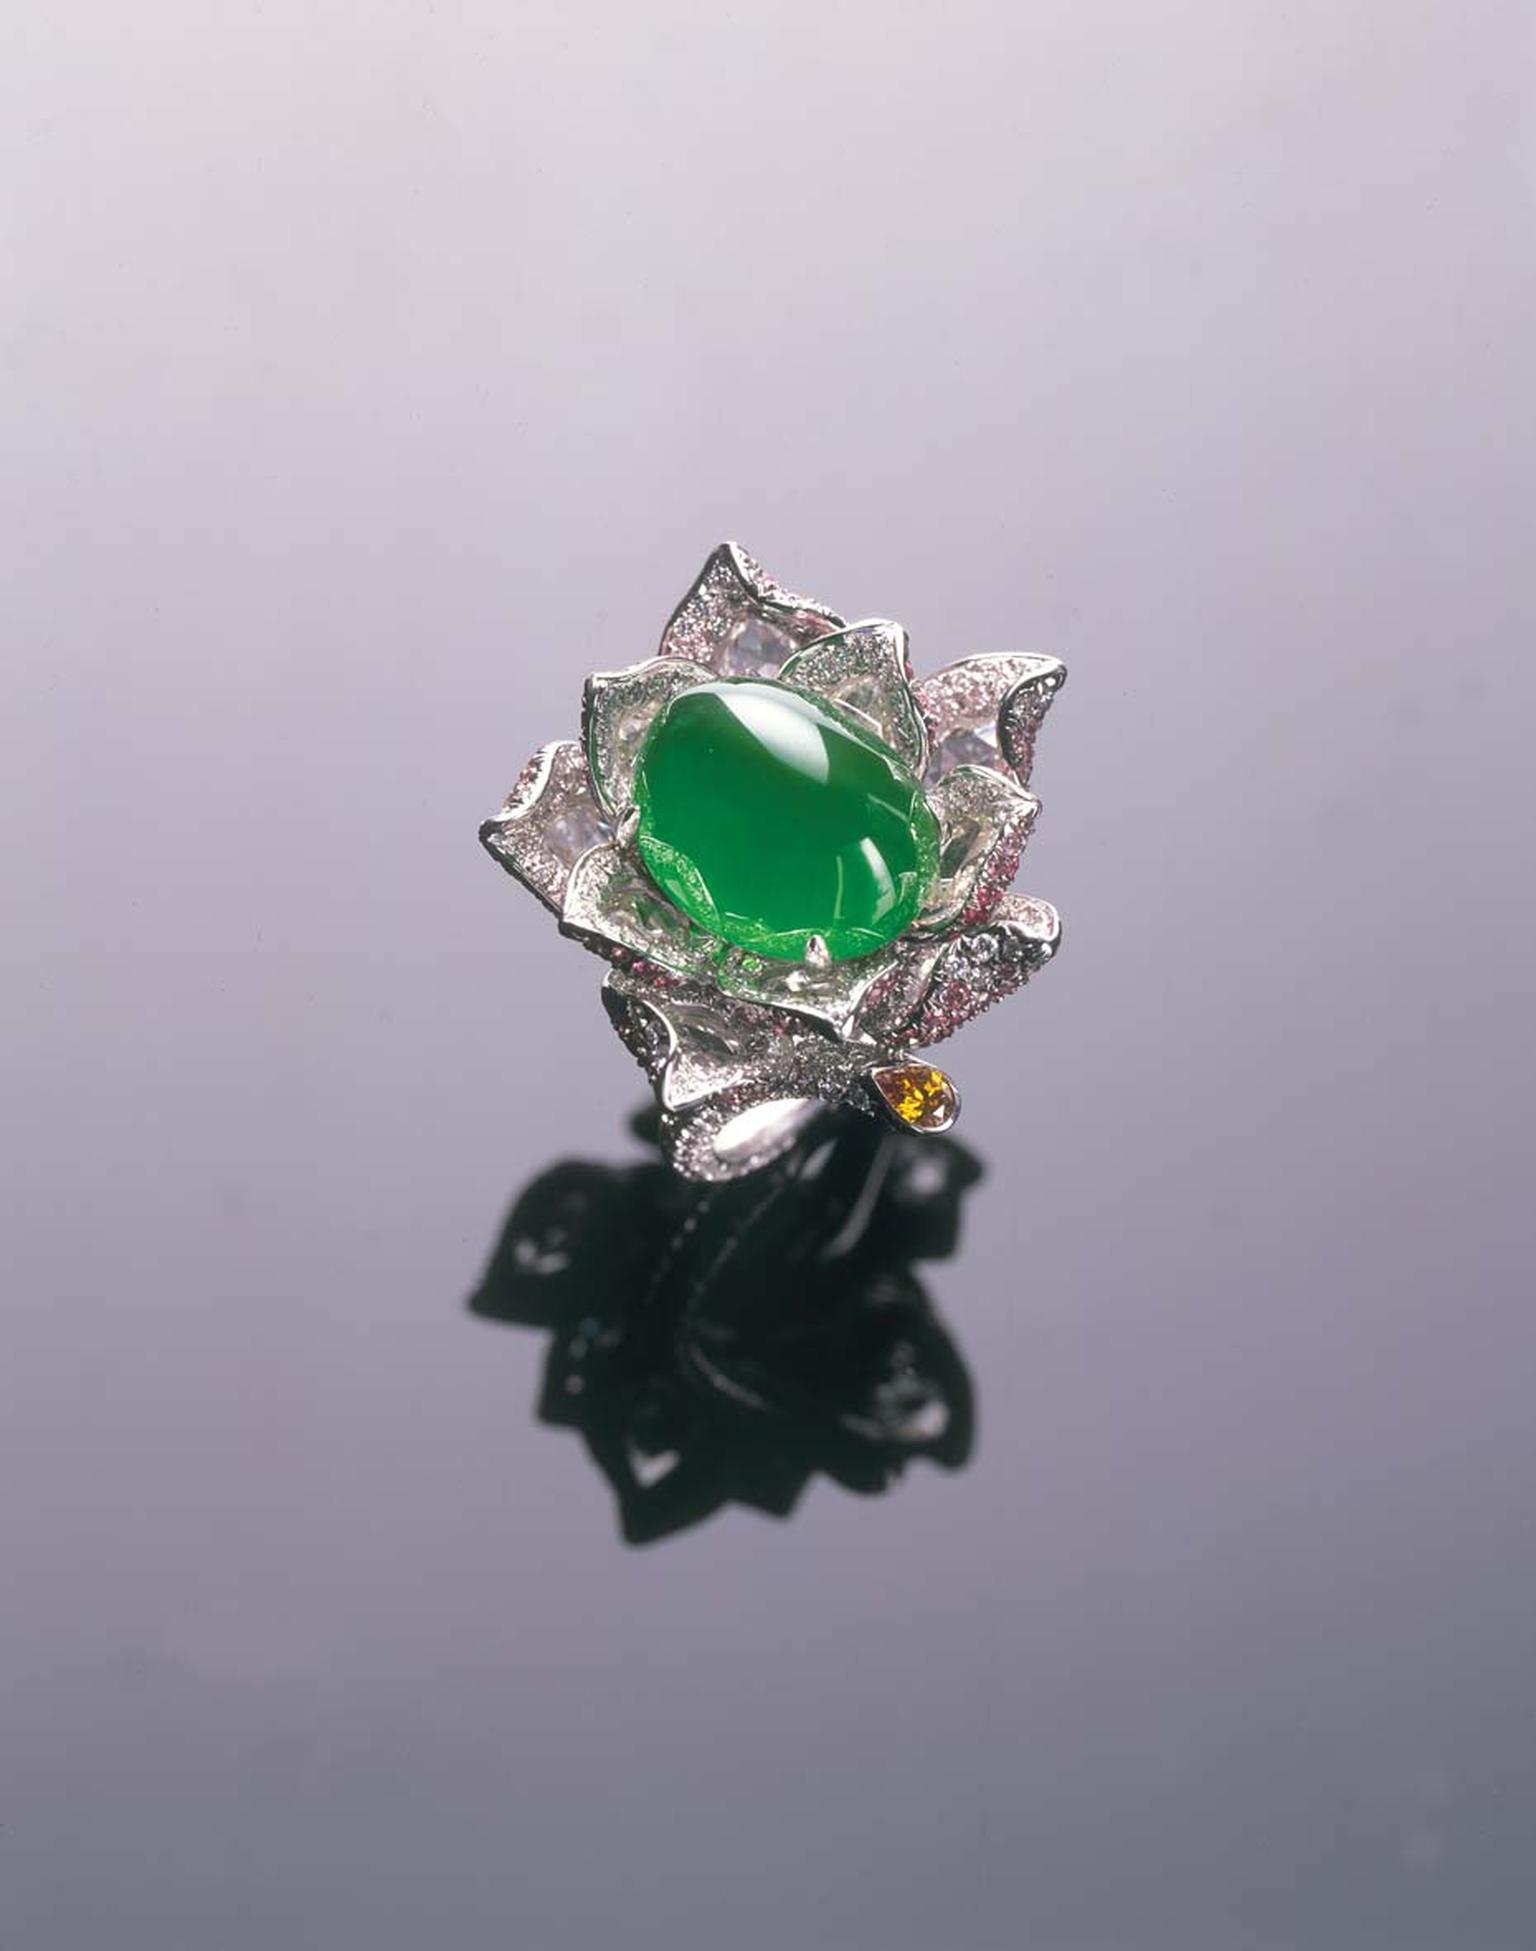 Jadeite jewellery: the transluscent gem that is revered in Chinese society